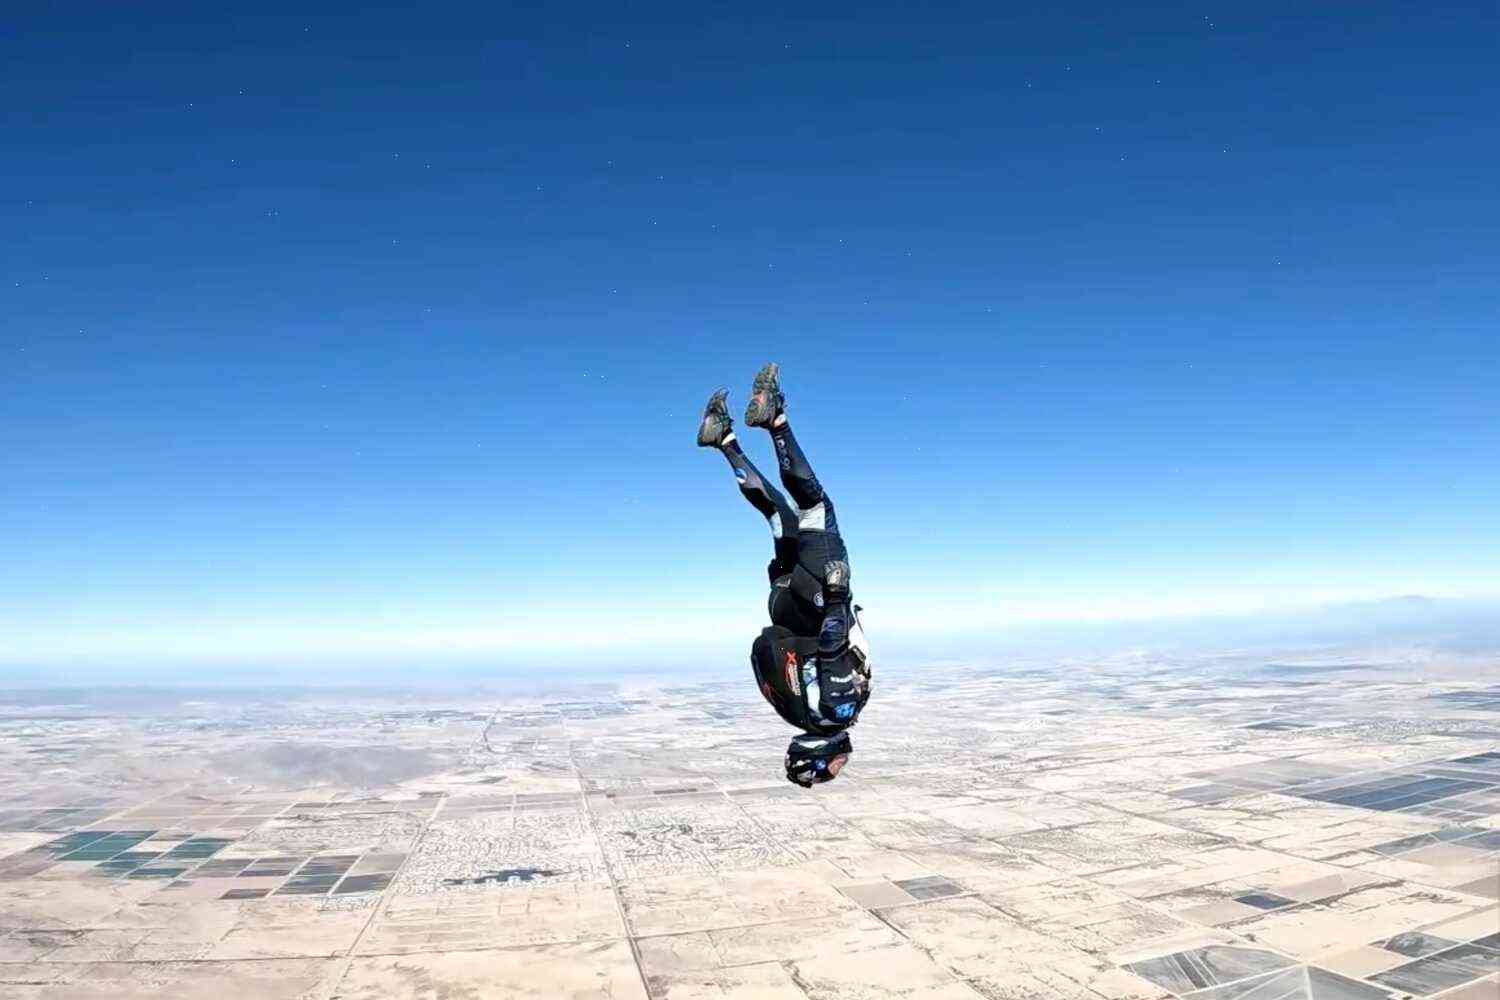 Can skydivers really be fast? Here’s what I learned watching them on camera